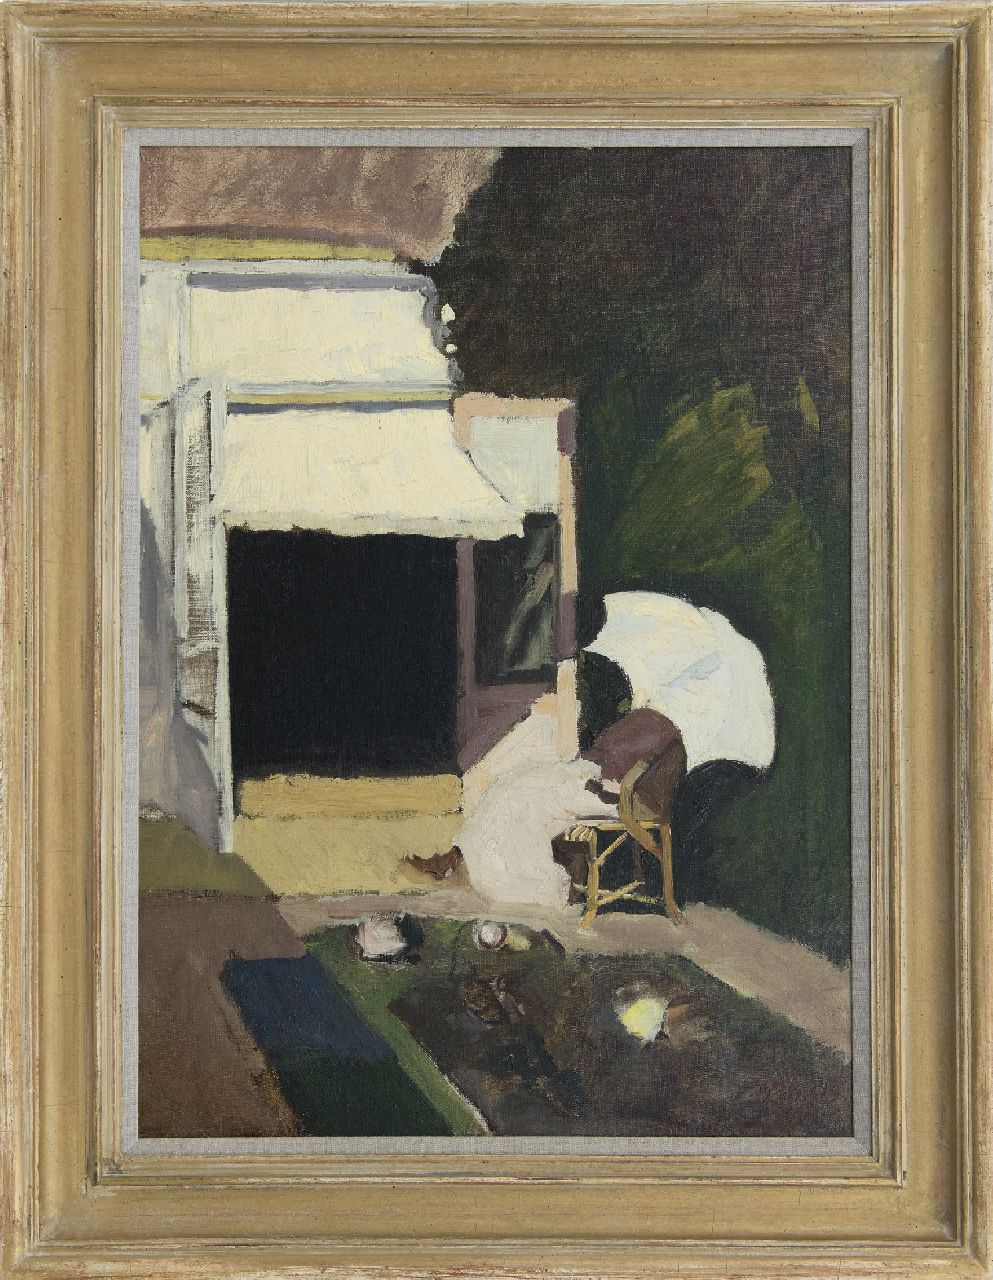 Baarsel P.W. van | Pieter Willem van Baarsel, Woman on a terrace, oil on canvas 70.1 x 50.3 cm, signed l.r. with monogram and dated 1914